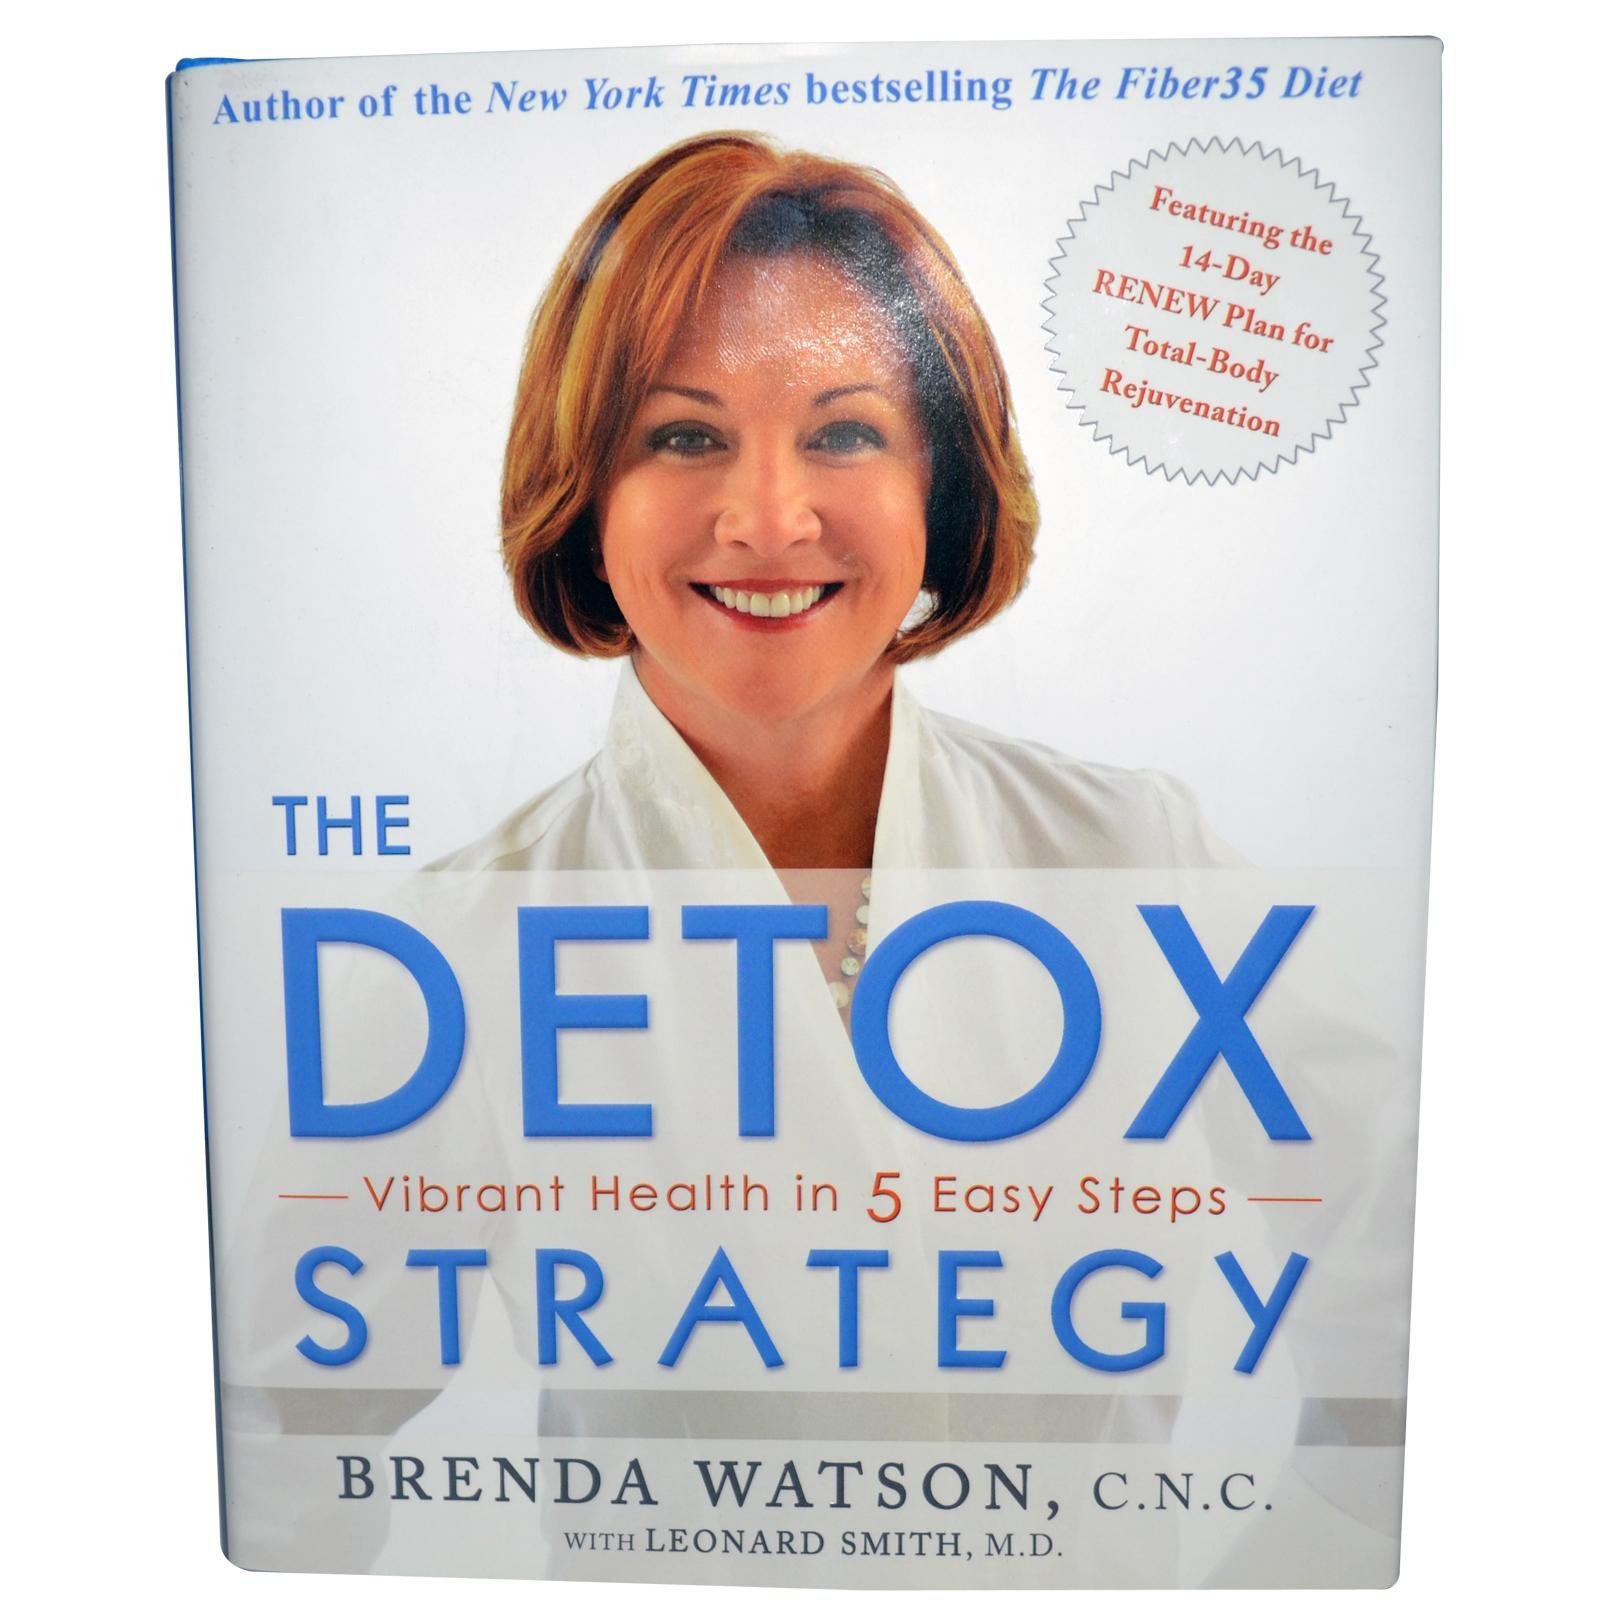 The Detox Strategy (Hard Cover Book) Book by Brenda Watson [Unknown Binding] - $11.29